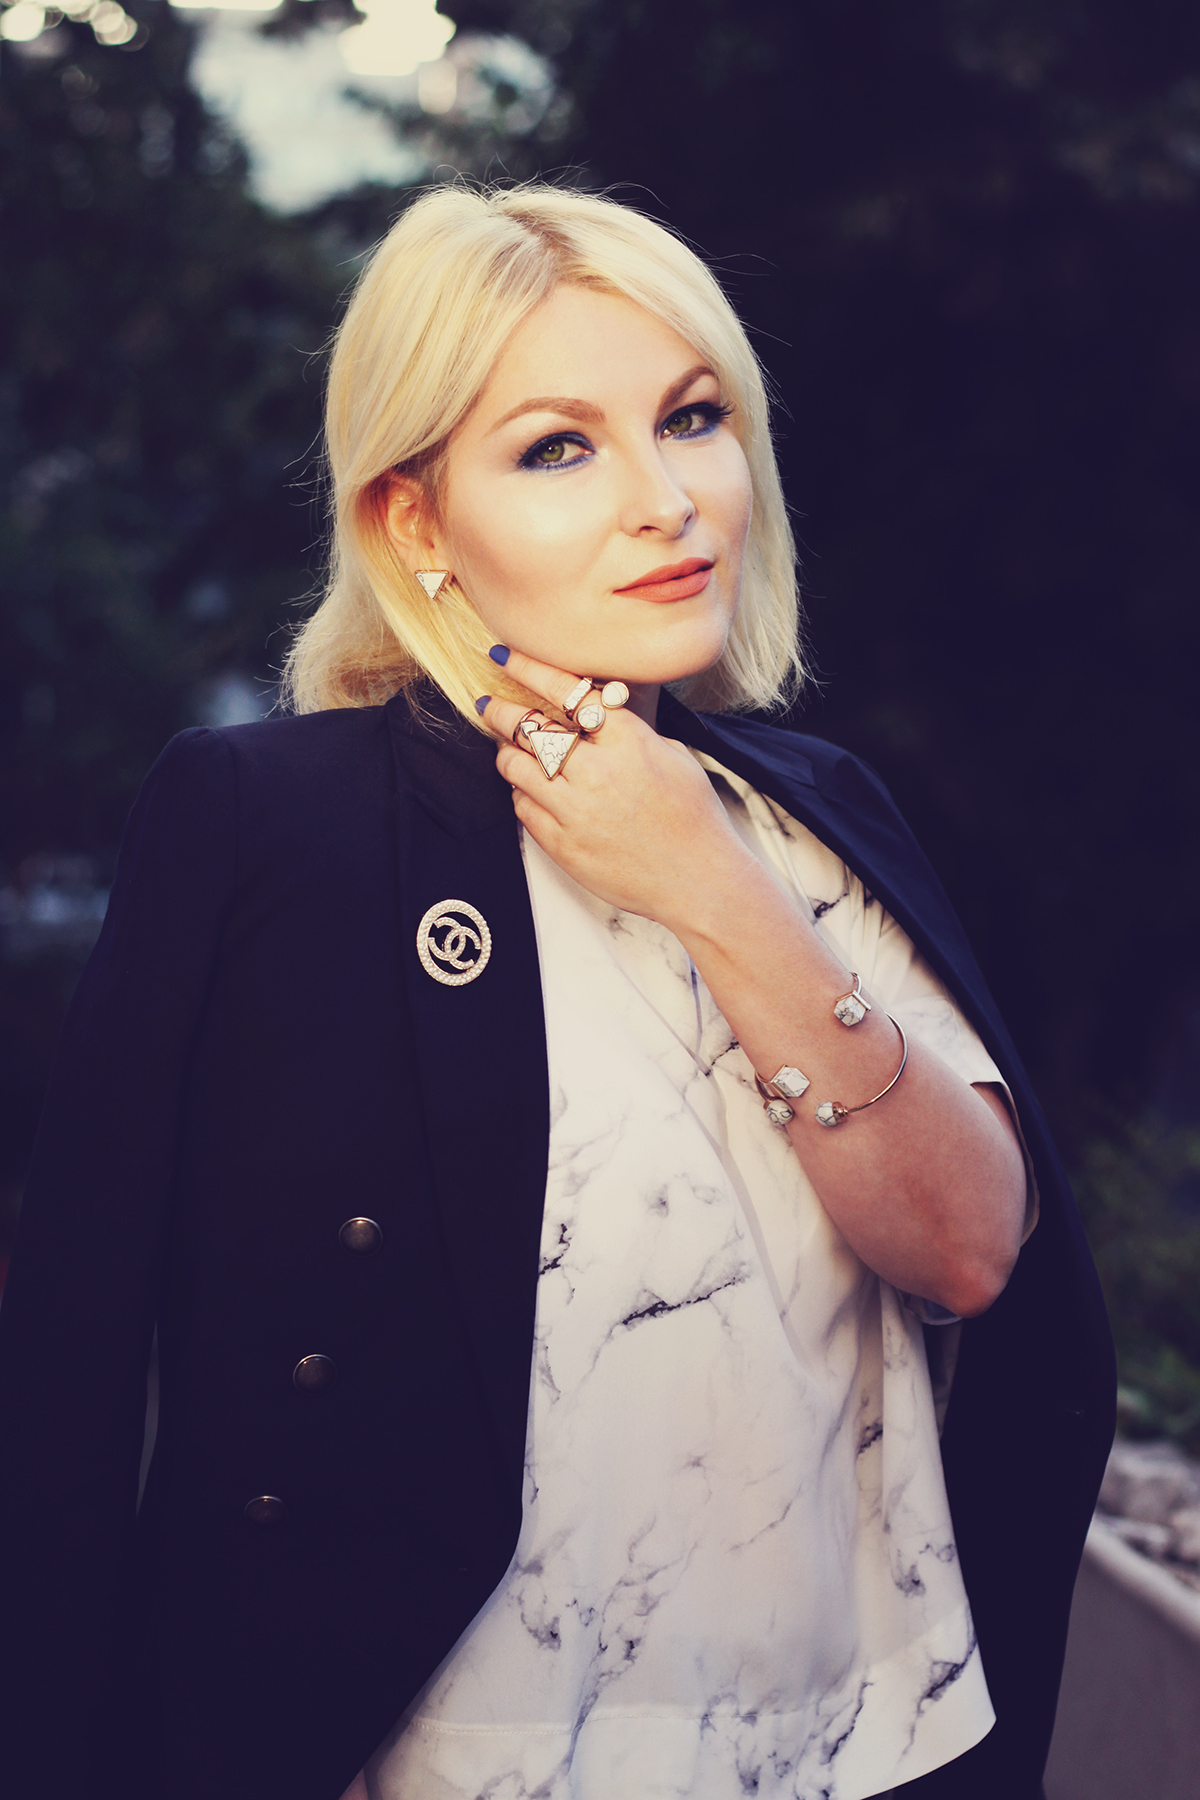 Marble look, office look, marble top, marble jewelry, Chanel brooch, navy blazer, blonde hair, navy blue and white look